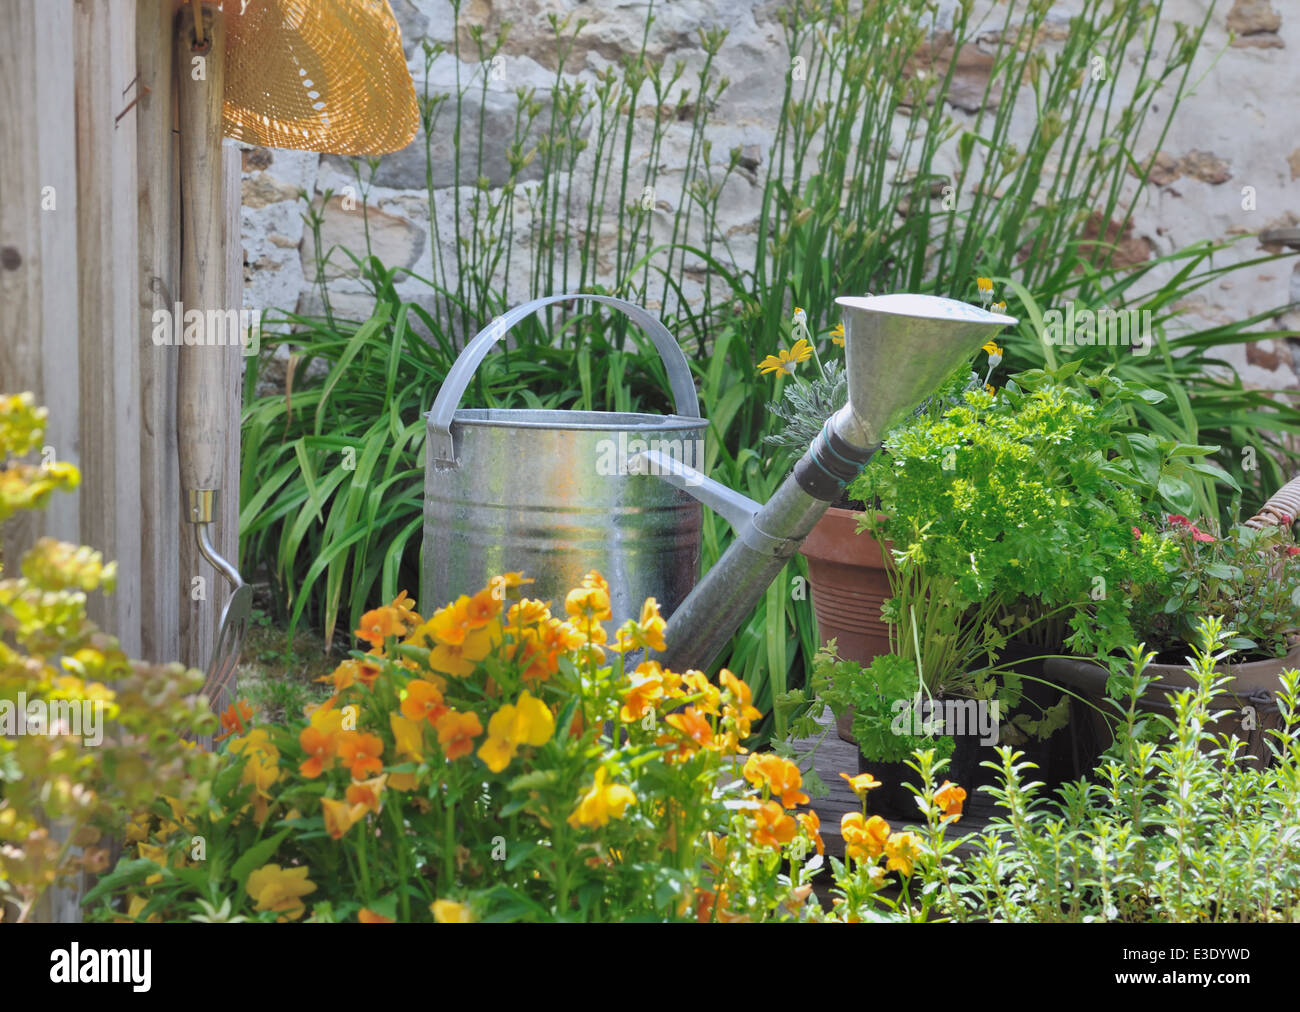 watering can among aromatic herbs and flowers Stock Photo